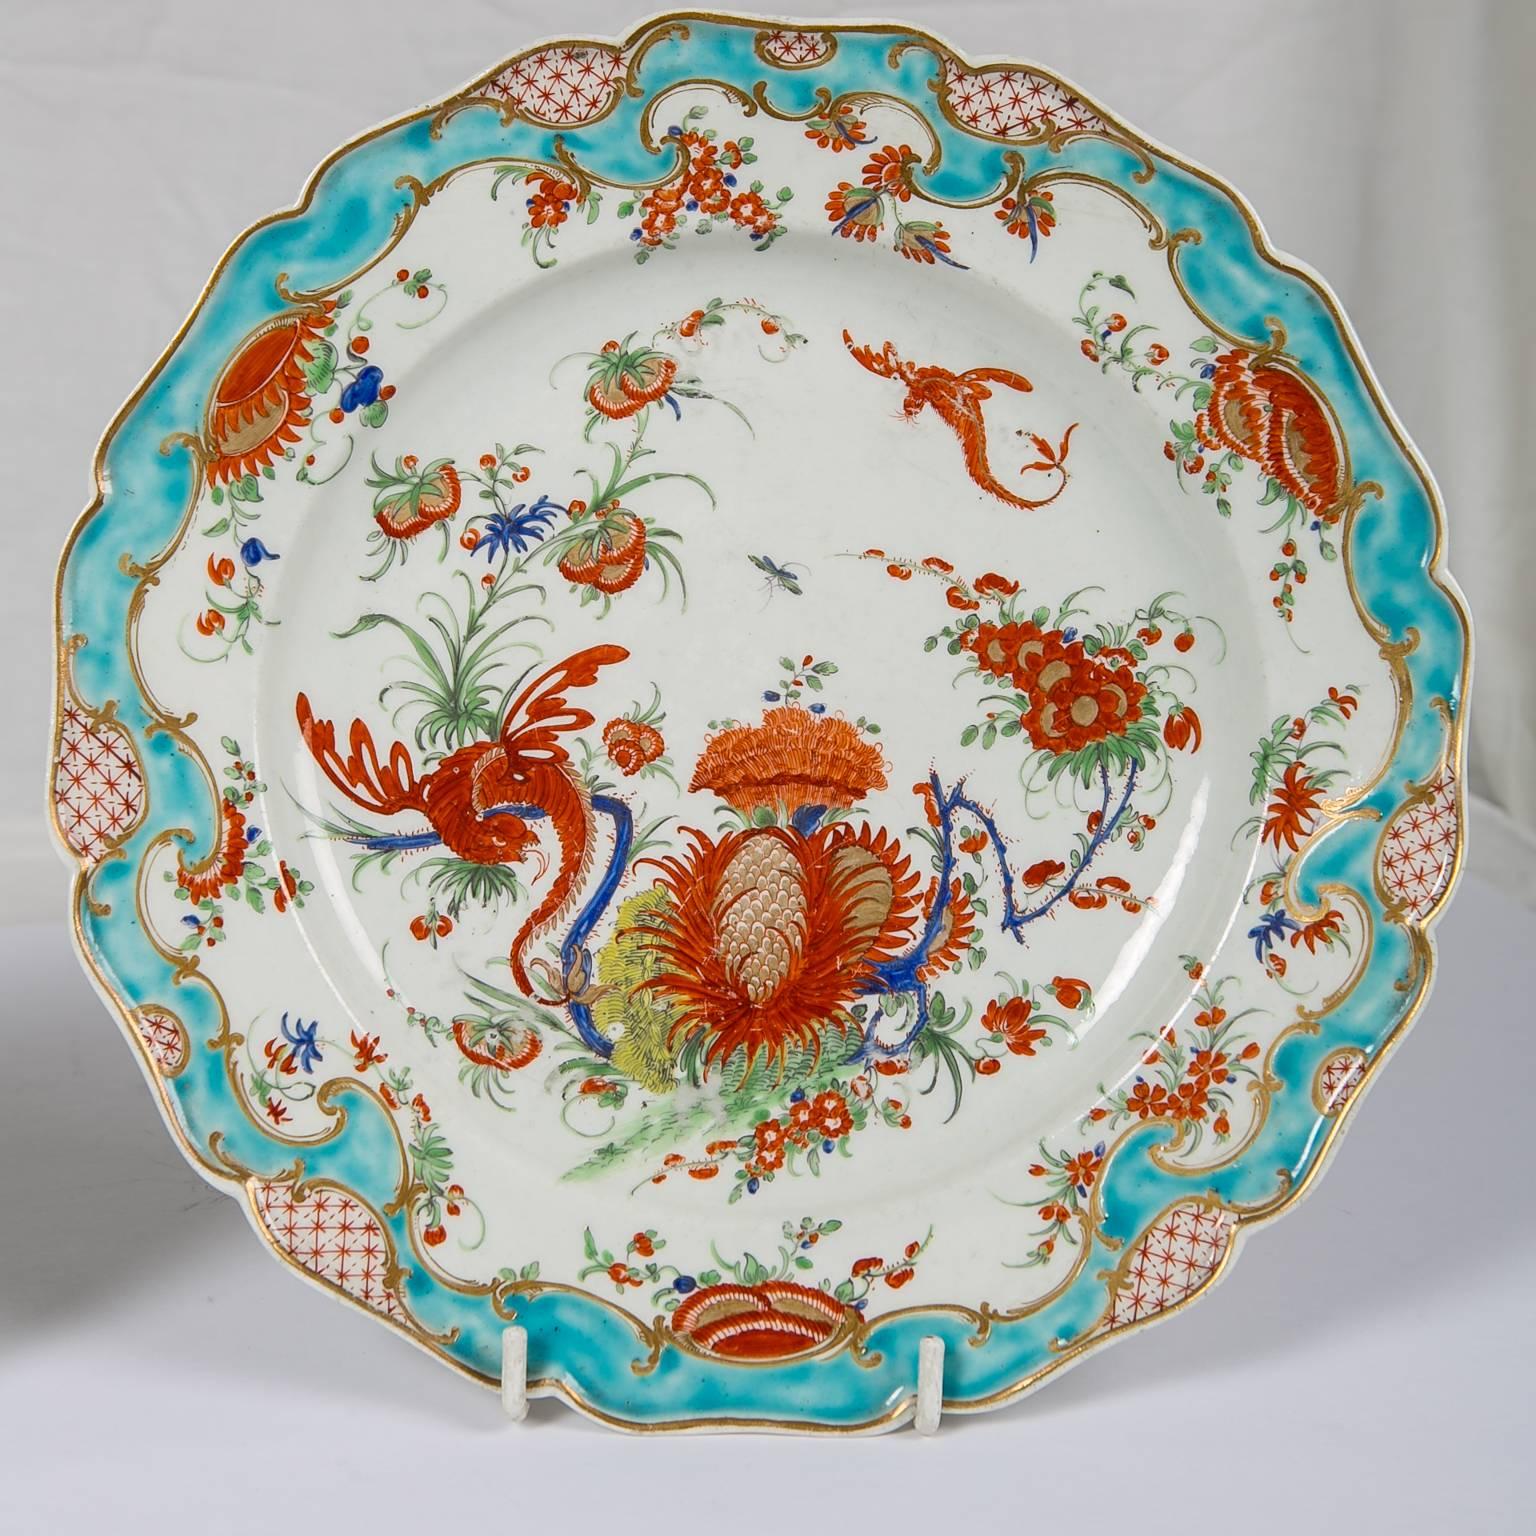 Neoclassical First Period Worcester Porcelain Dishes a Pair in the Jabberwocky Pattern